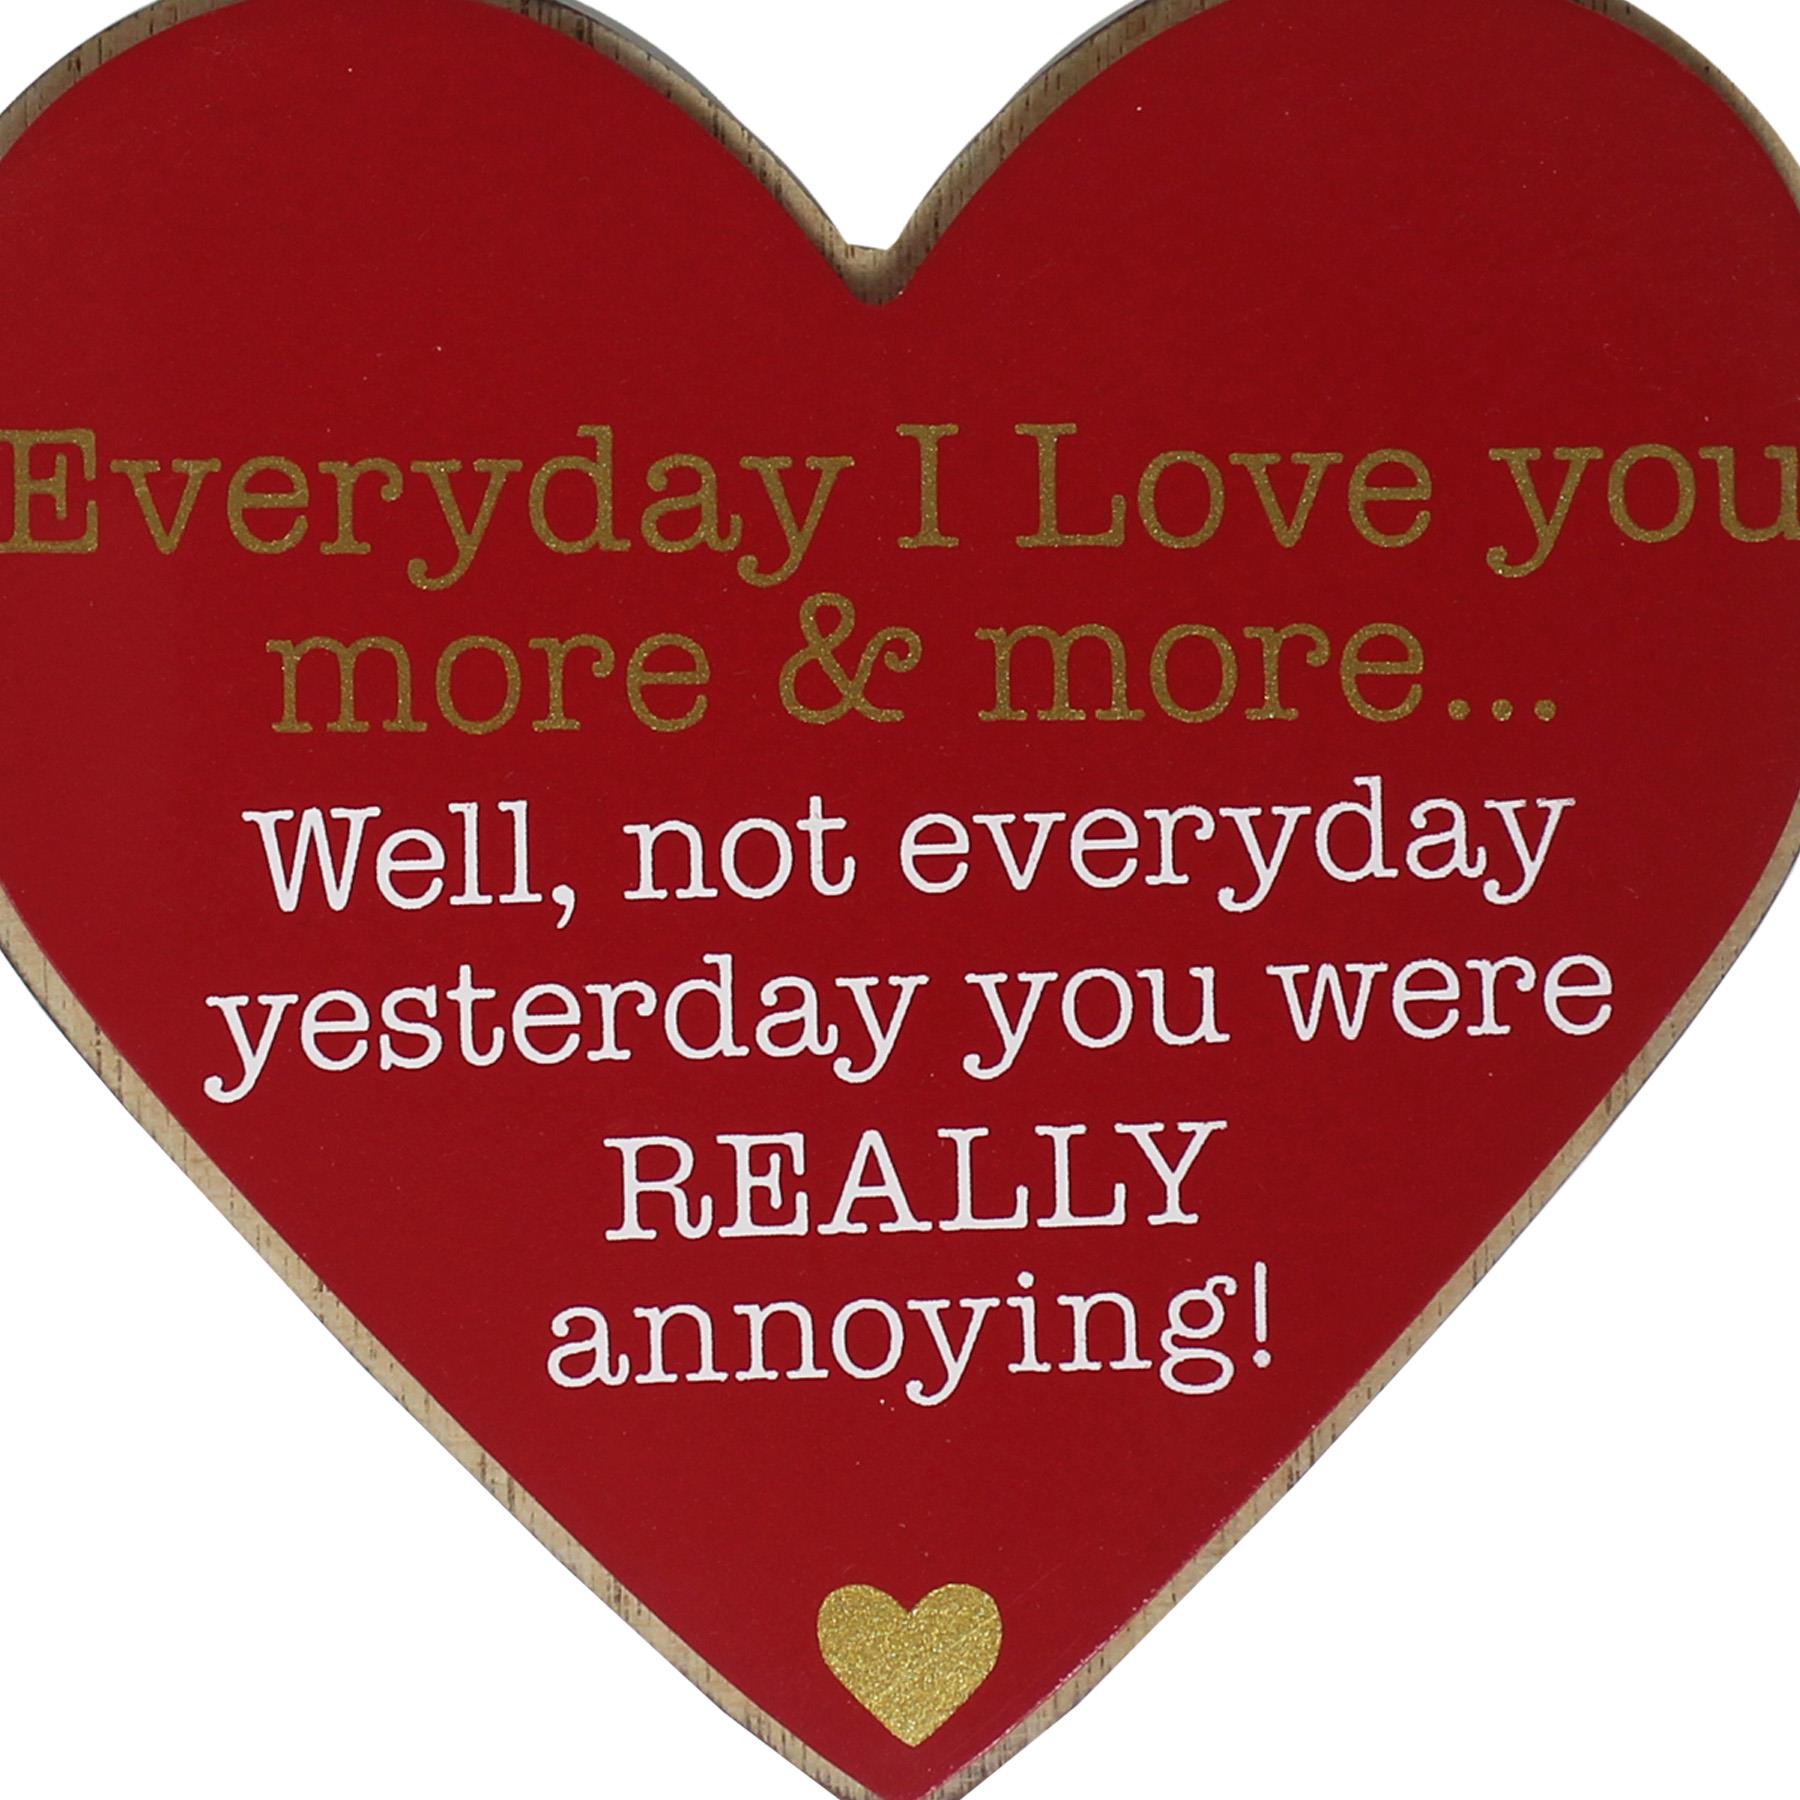 Valentines Heart Plaque Red Everyday I Love You More and More...